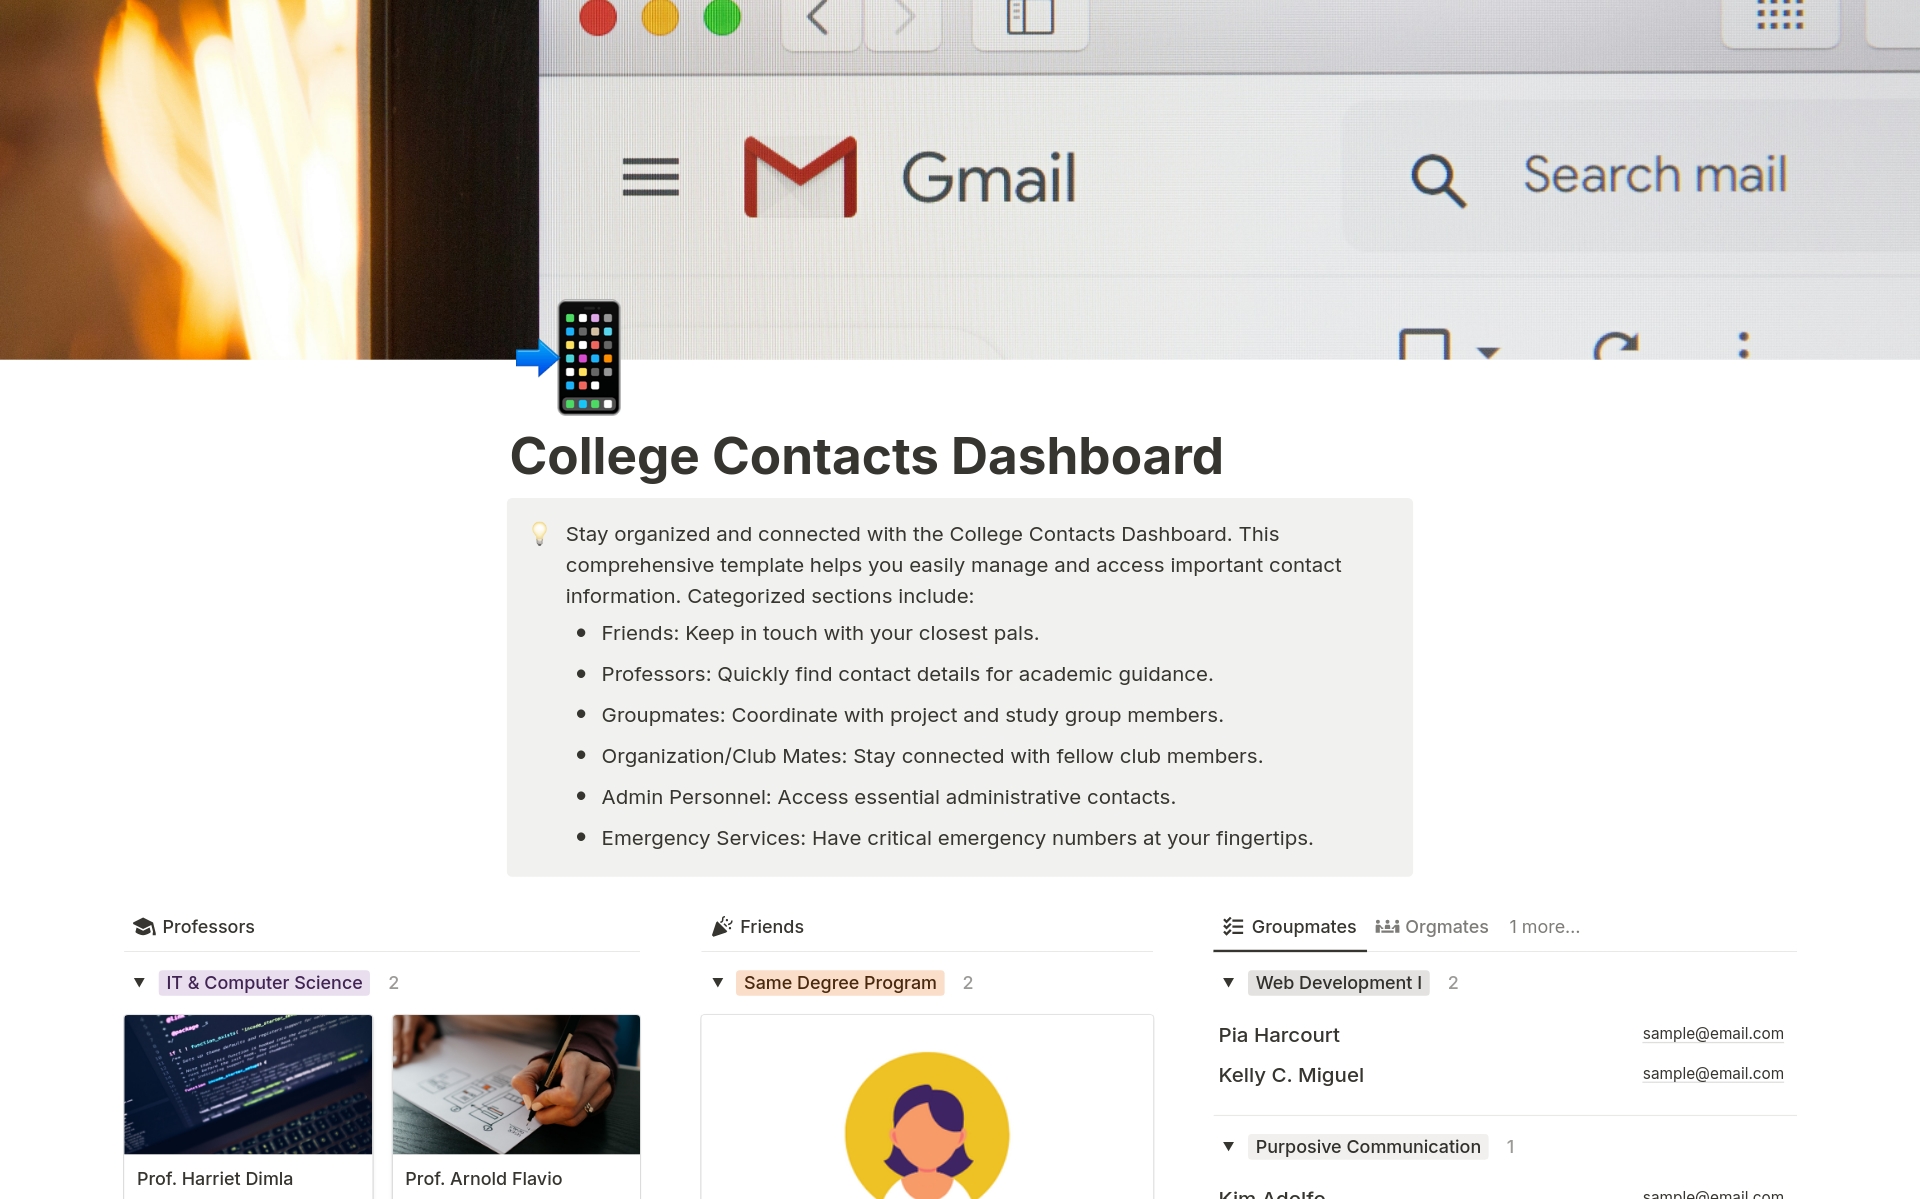 Stay organized and connected with the College Contacts Dashboard. This comprehensive template helps you easily manage and access important contact information.